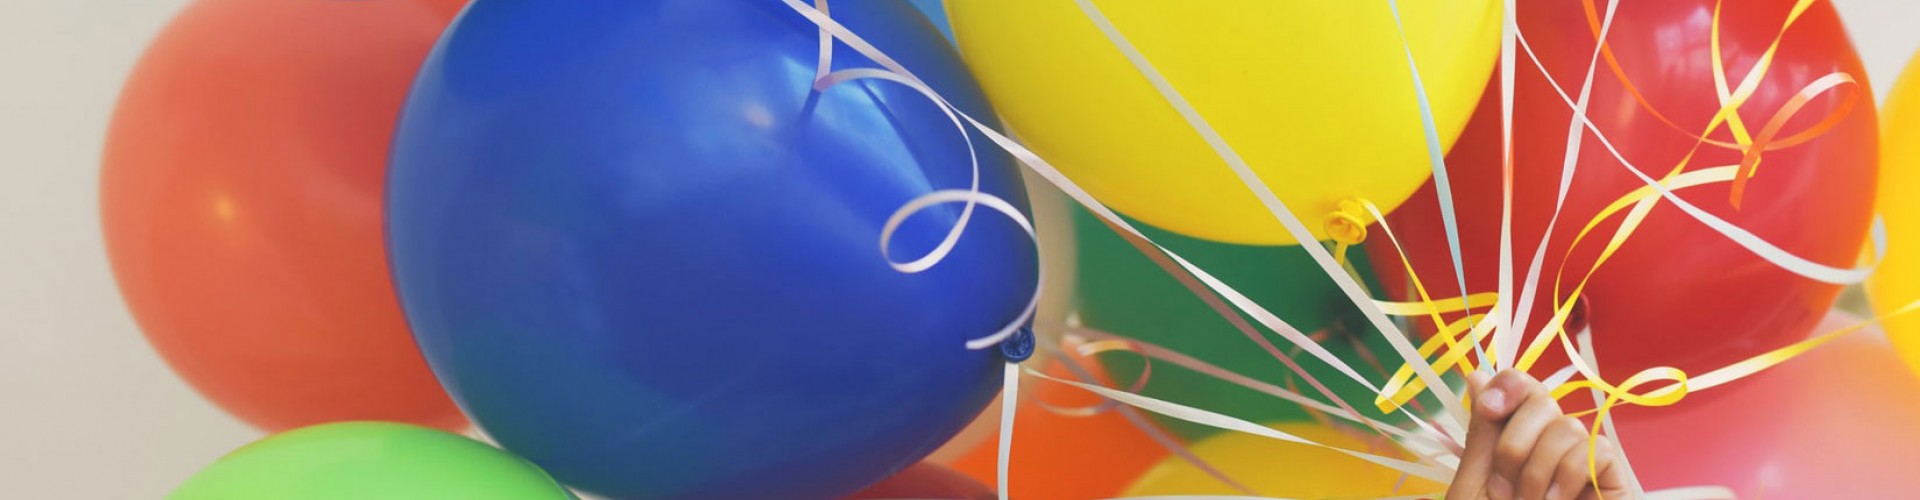 bunch of colourful balloons|Happy person